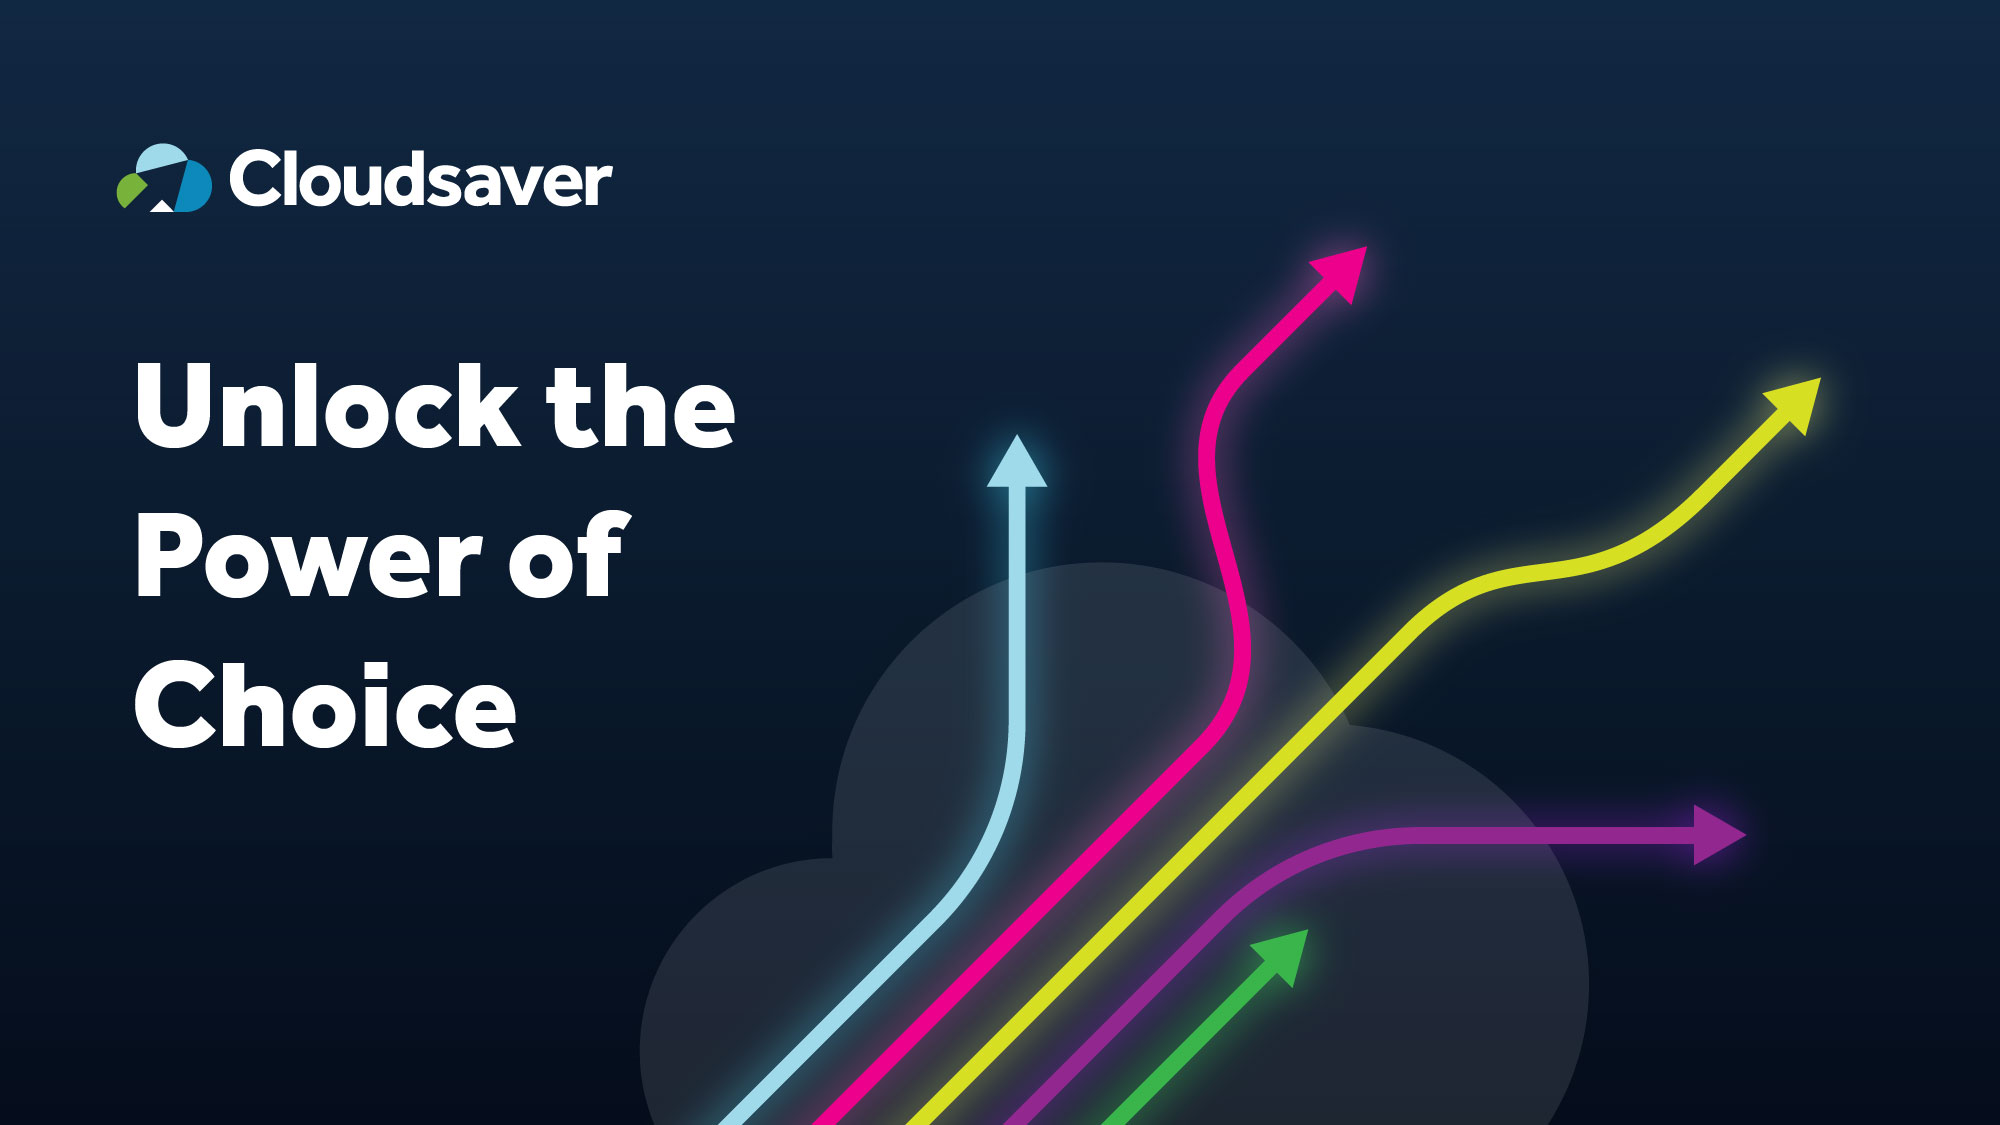 Unlock the Power of Choice with the Cloudsaver Platform